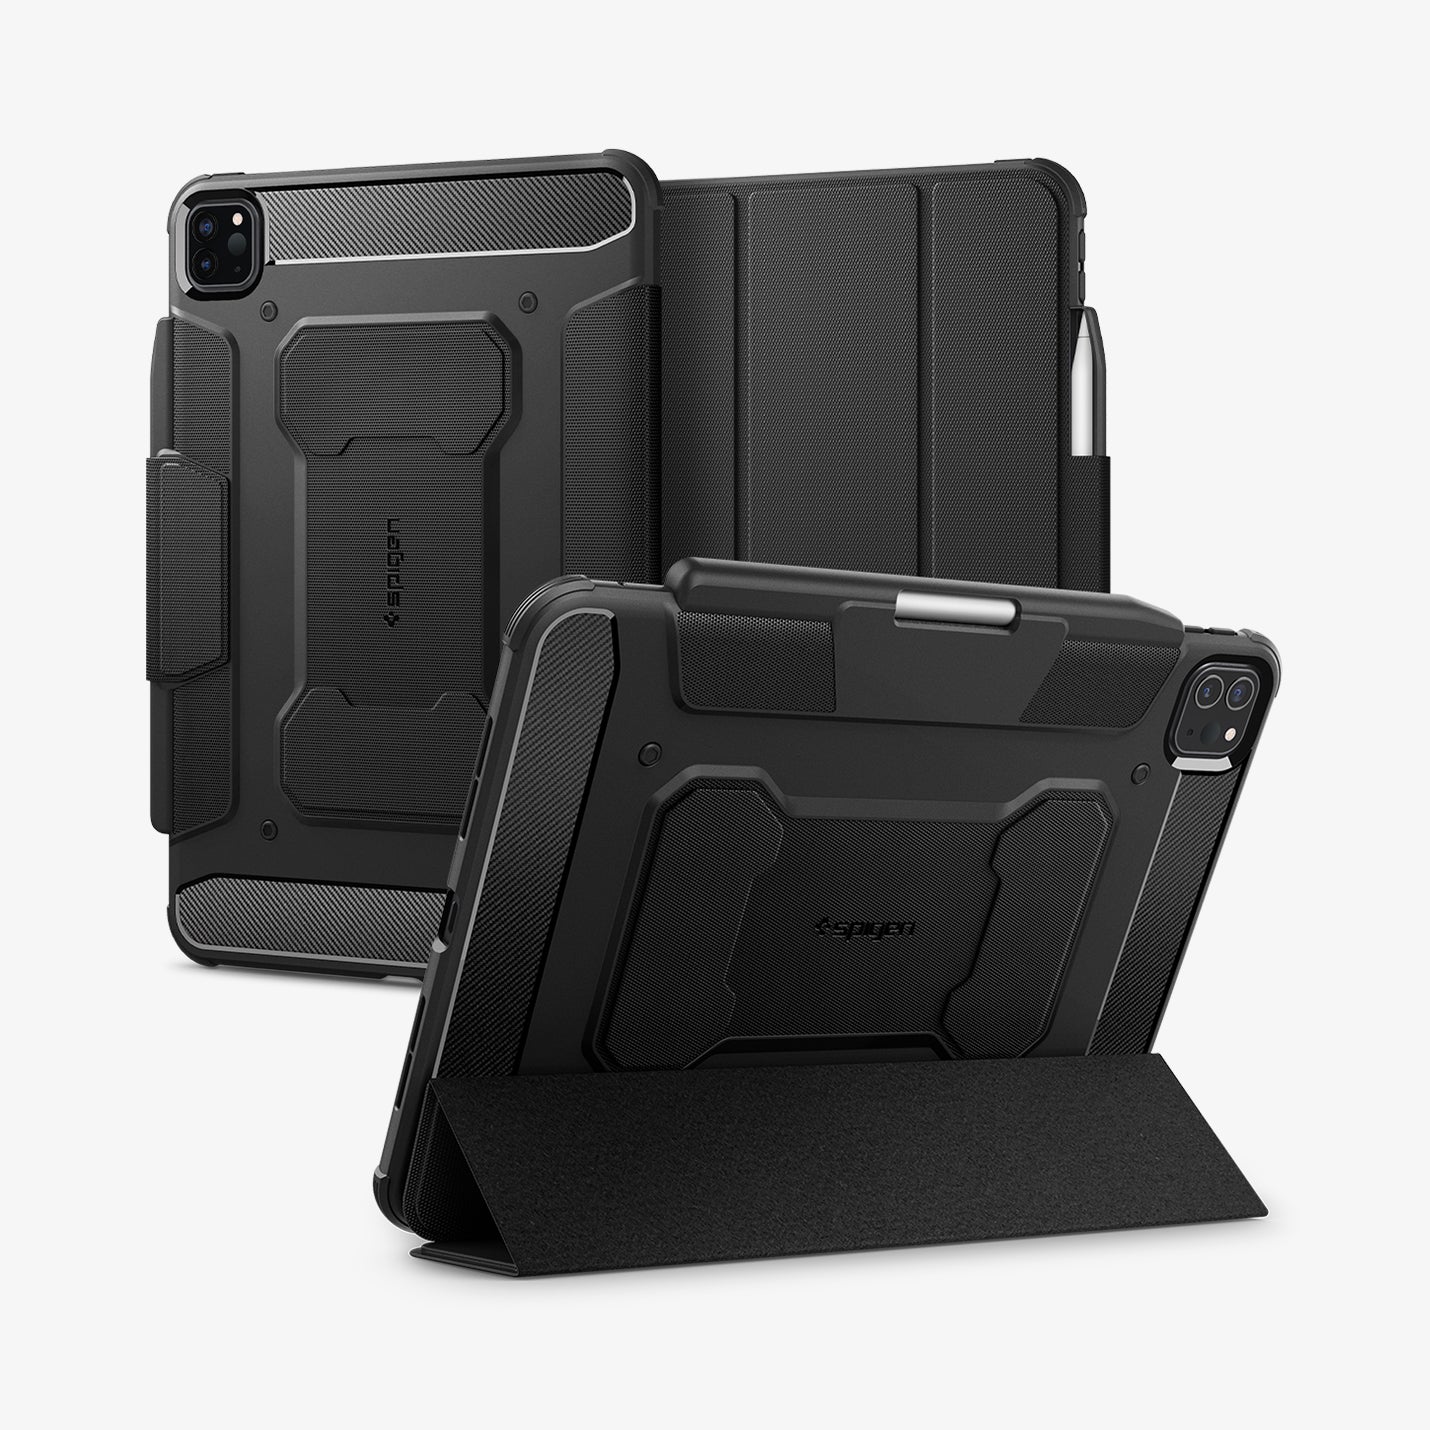 ACS07017 - iPad Pro 11-inch Case Rugged Armor Pro in Black showing the back, partial front and another device showing the folded cover converted into kickstand